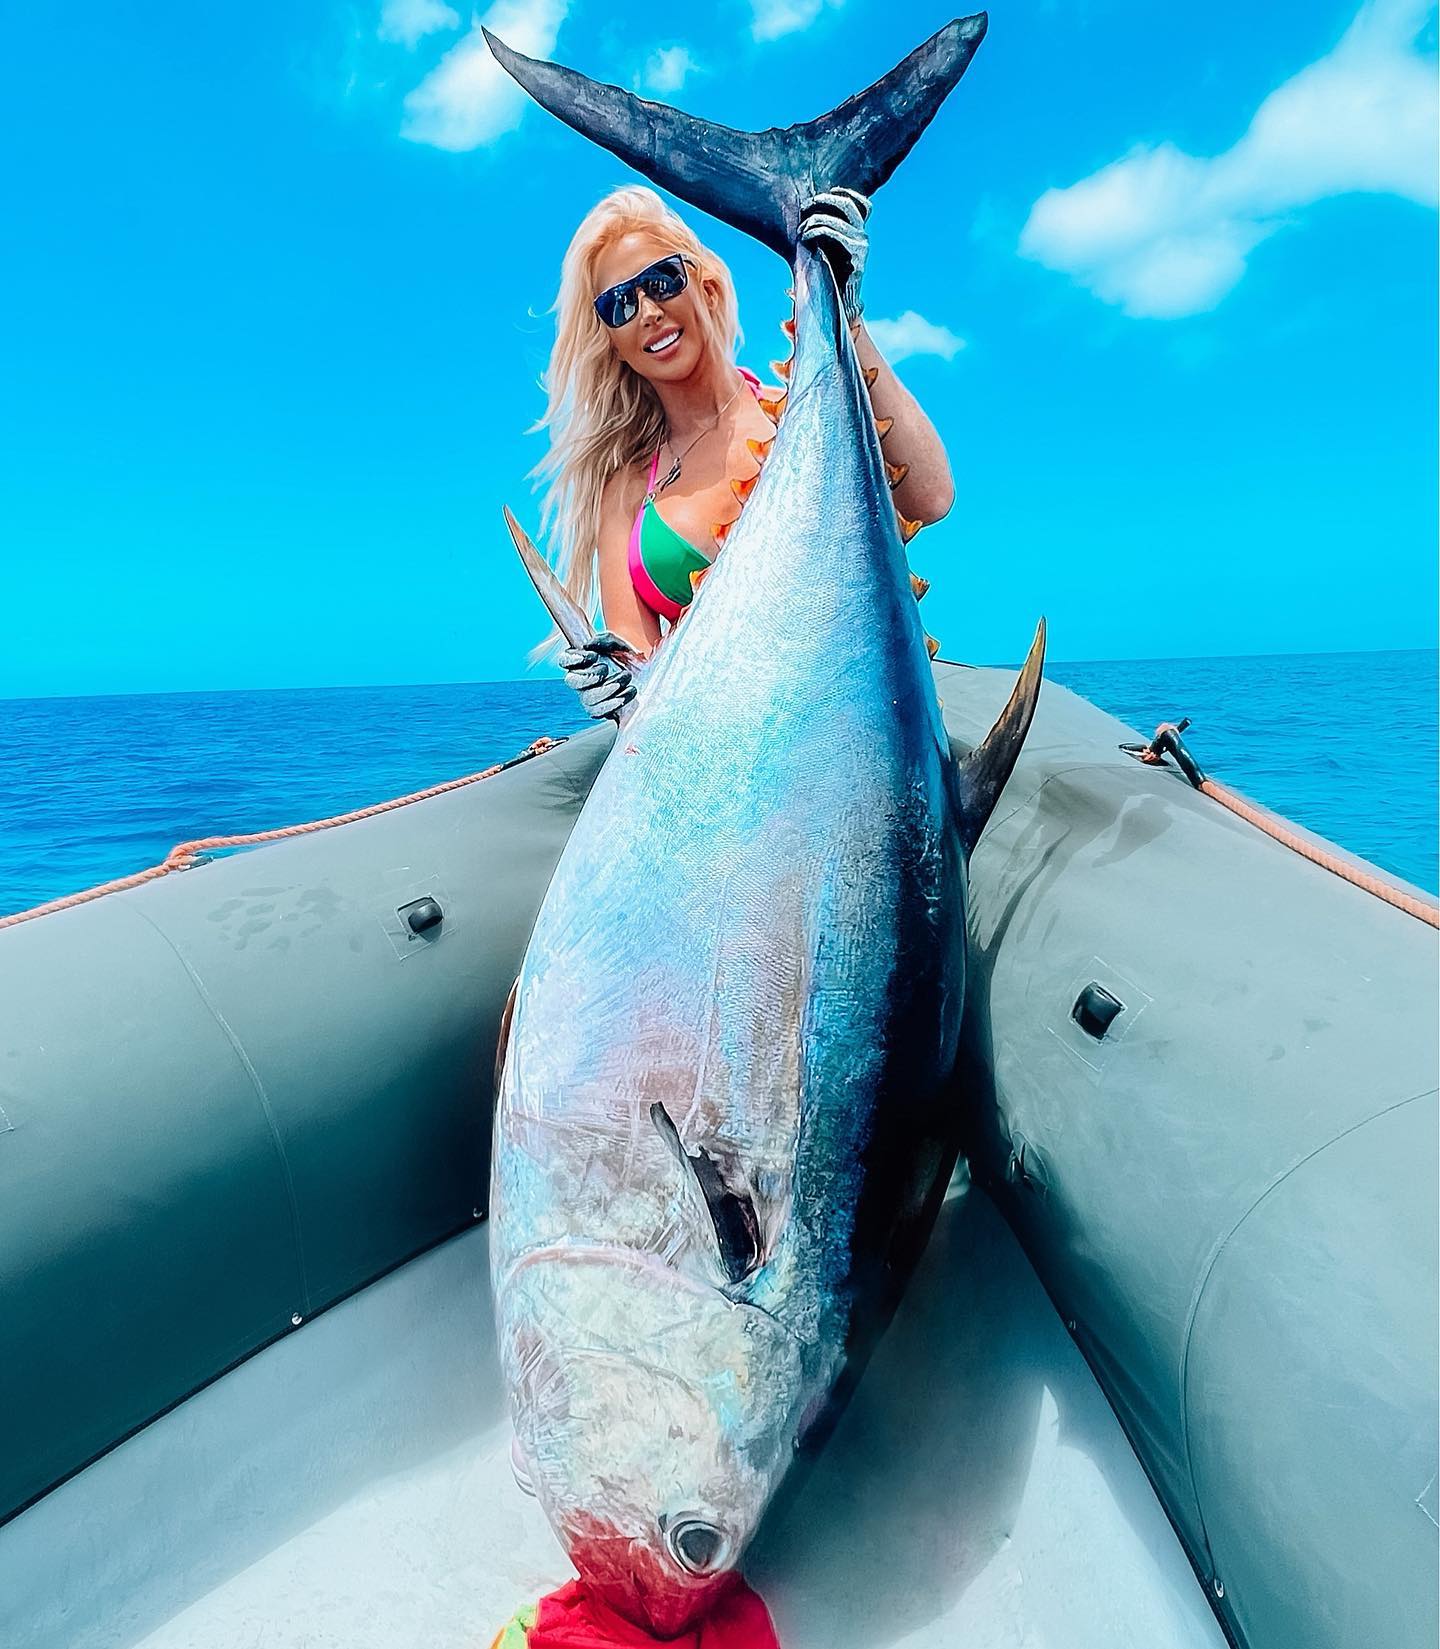 Meet world's sexiest spearfisher & OnlyFans model who catches fish bigger  than her and fans call 'bad ass with good ass